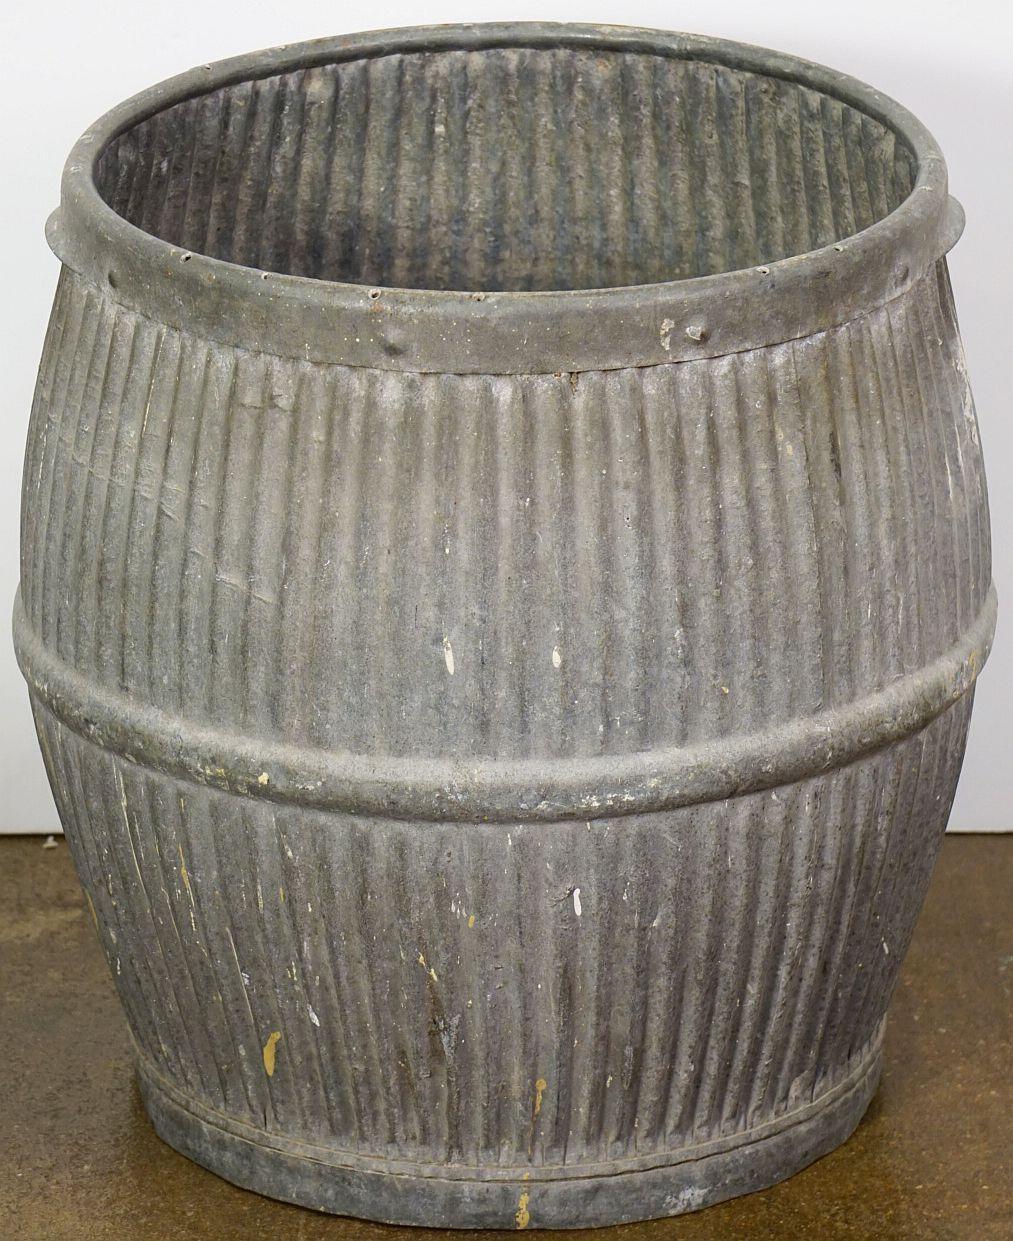 A fine medium-sized English garden pot or dolly tub planter of zinc, featuring a ribbed design to the circumference, with rolled edge top and base.

 Measures: (Height 19 1/2 in x Diameter 19 1/2 in) 

Can be turned upside down for use as a